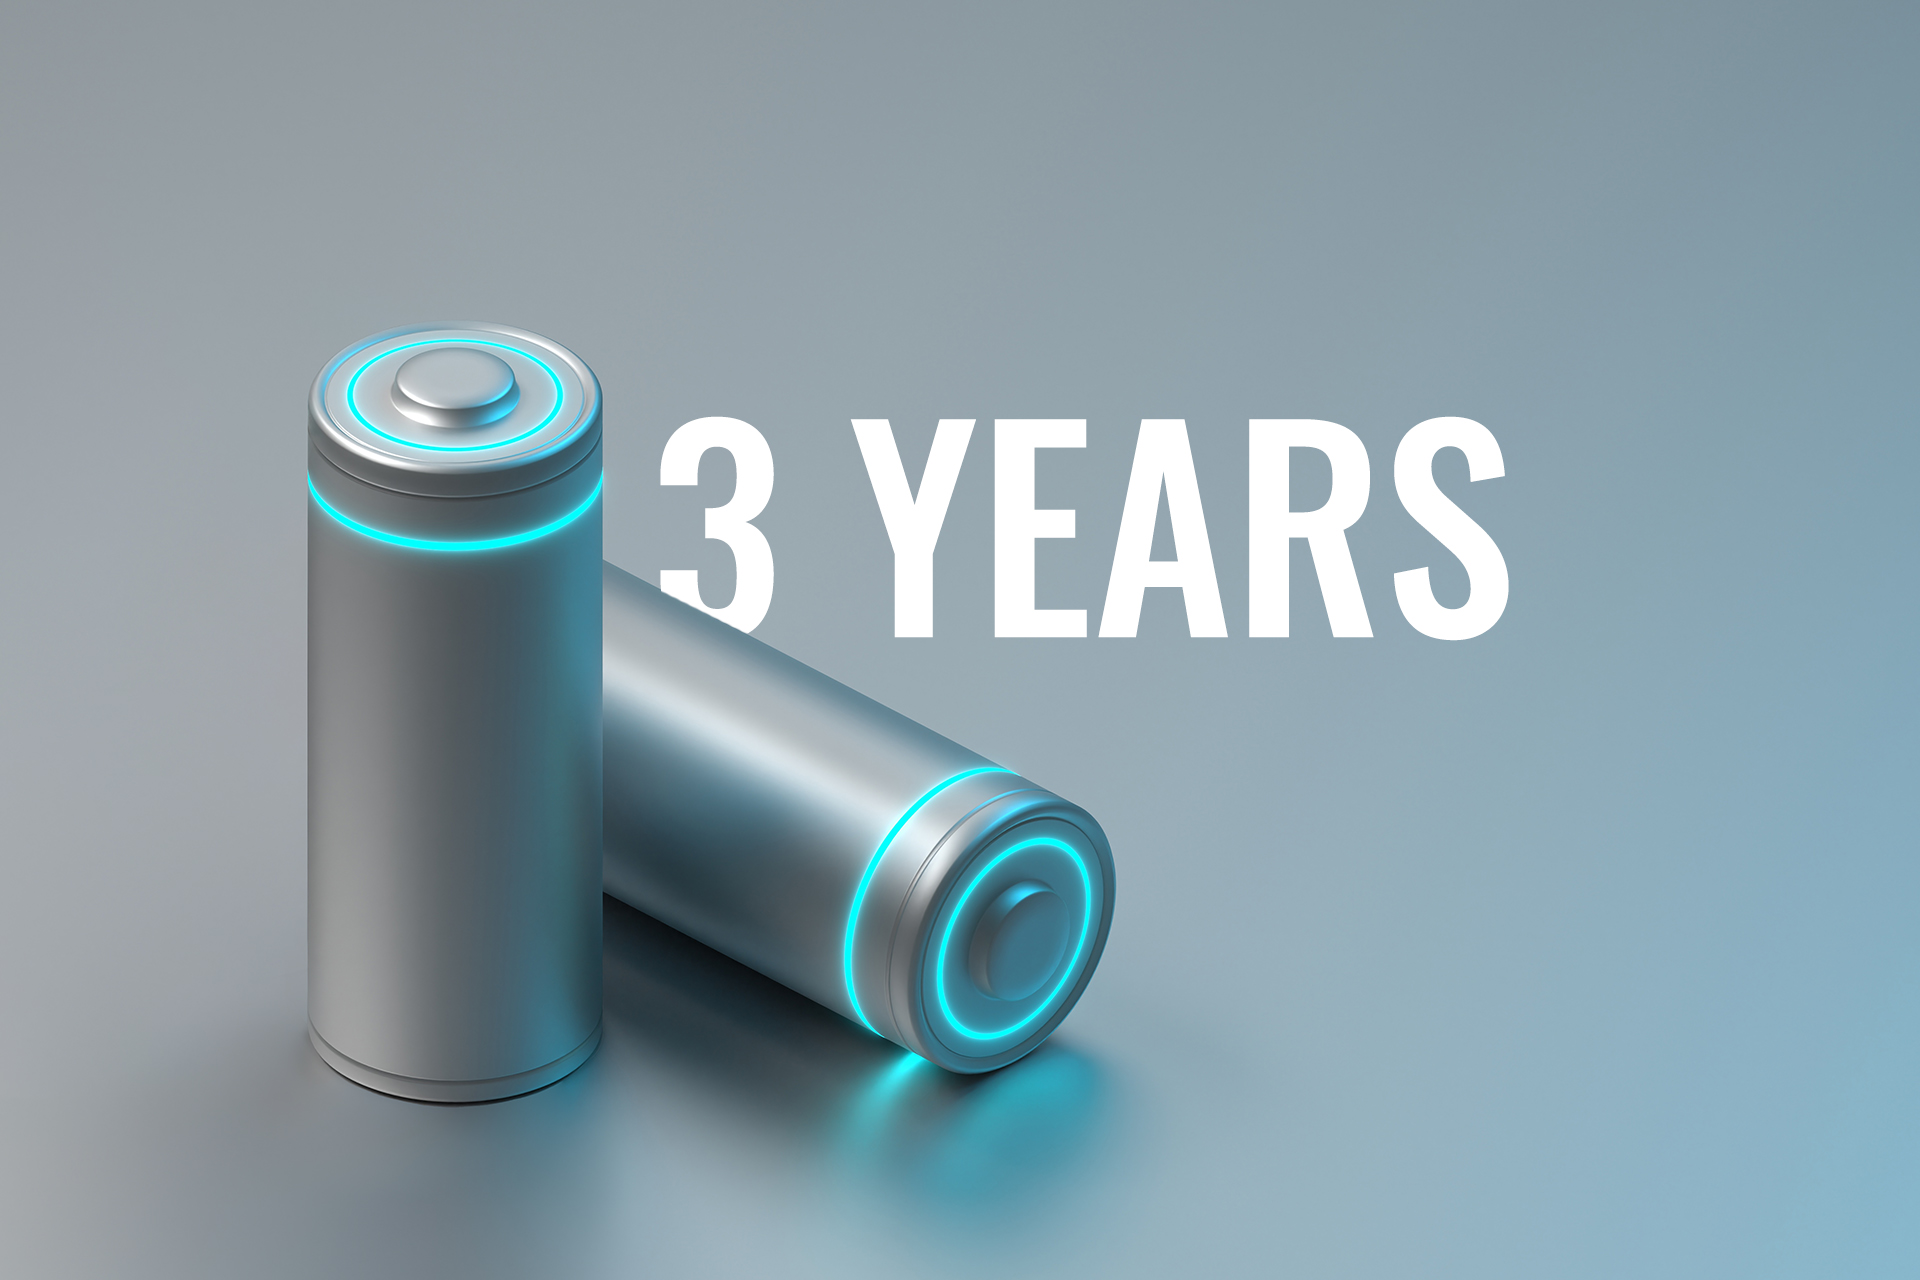 Up to 3 years battery life time*